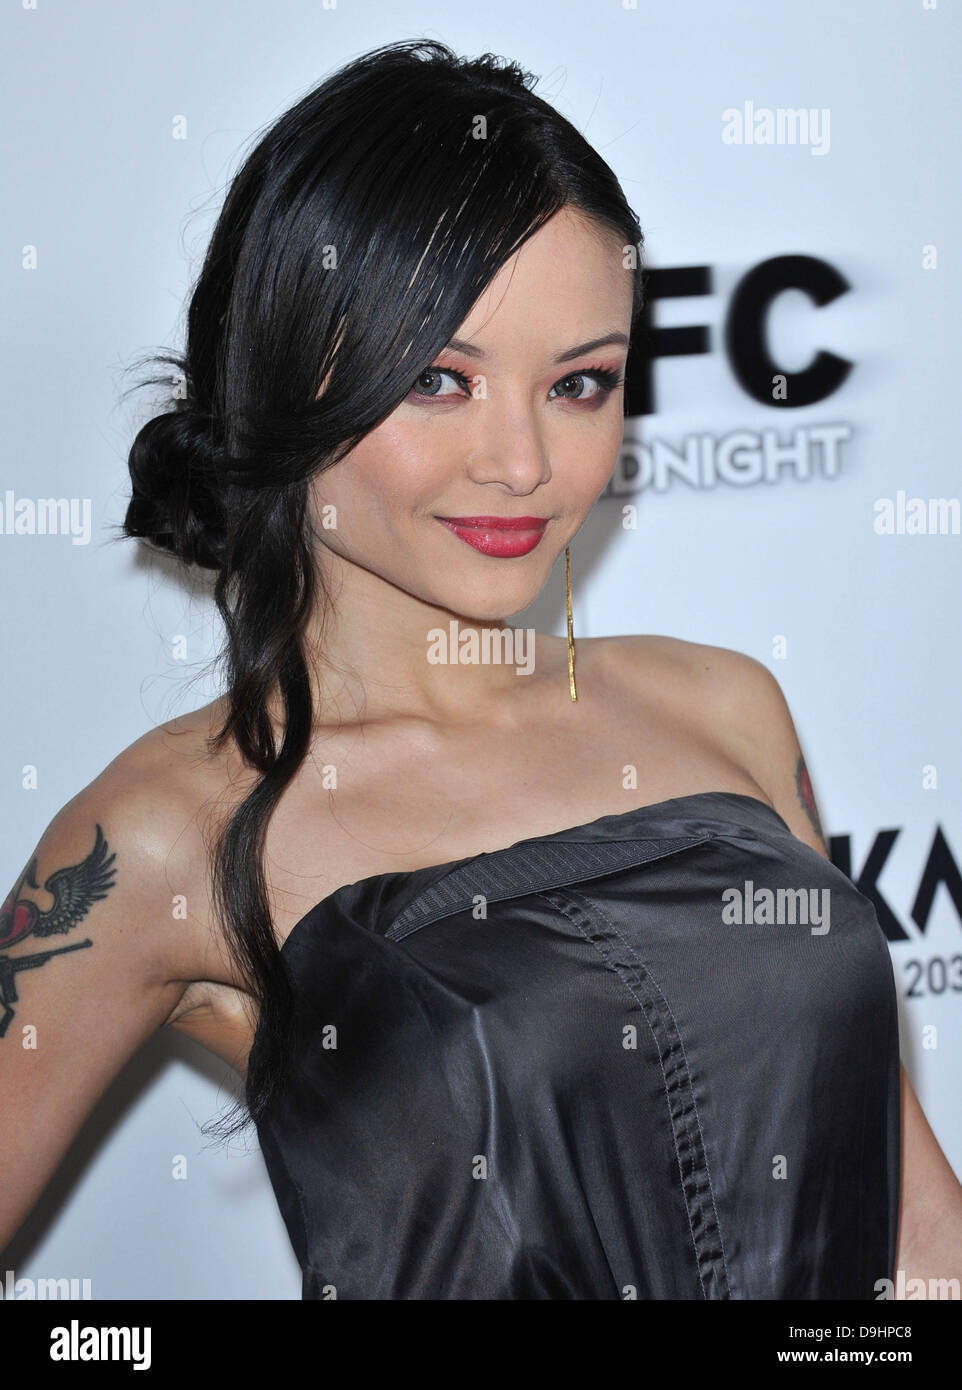 Tila Tequila Los Angeles premiere of 'Super' held at The Egyptian Theatre - Arrivals Los Angeles, California - 21.03.11 Stock Photo